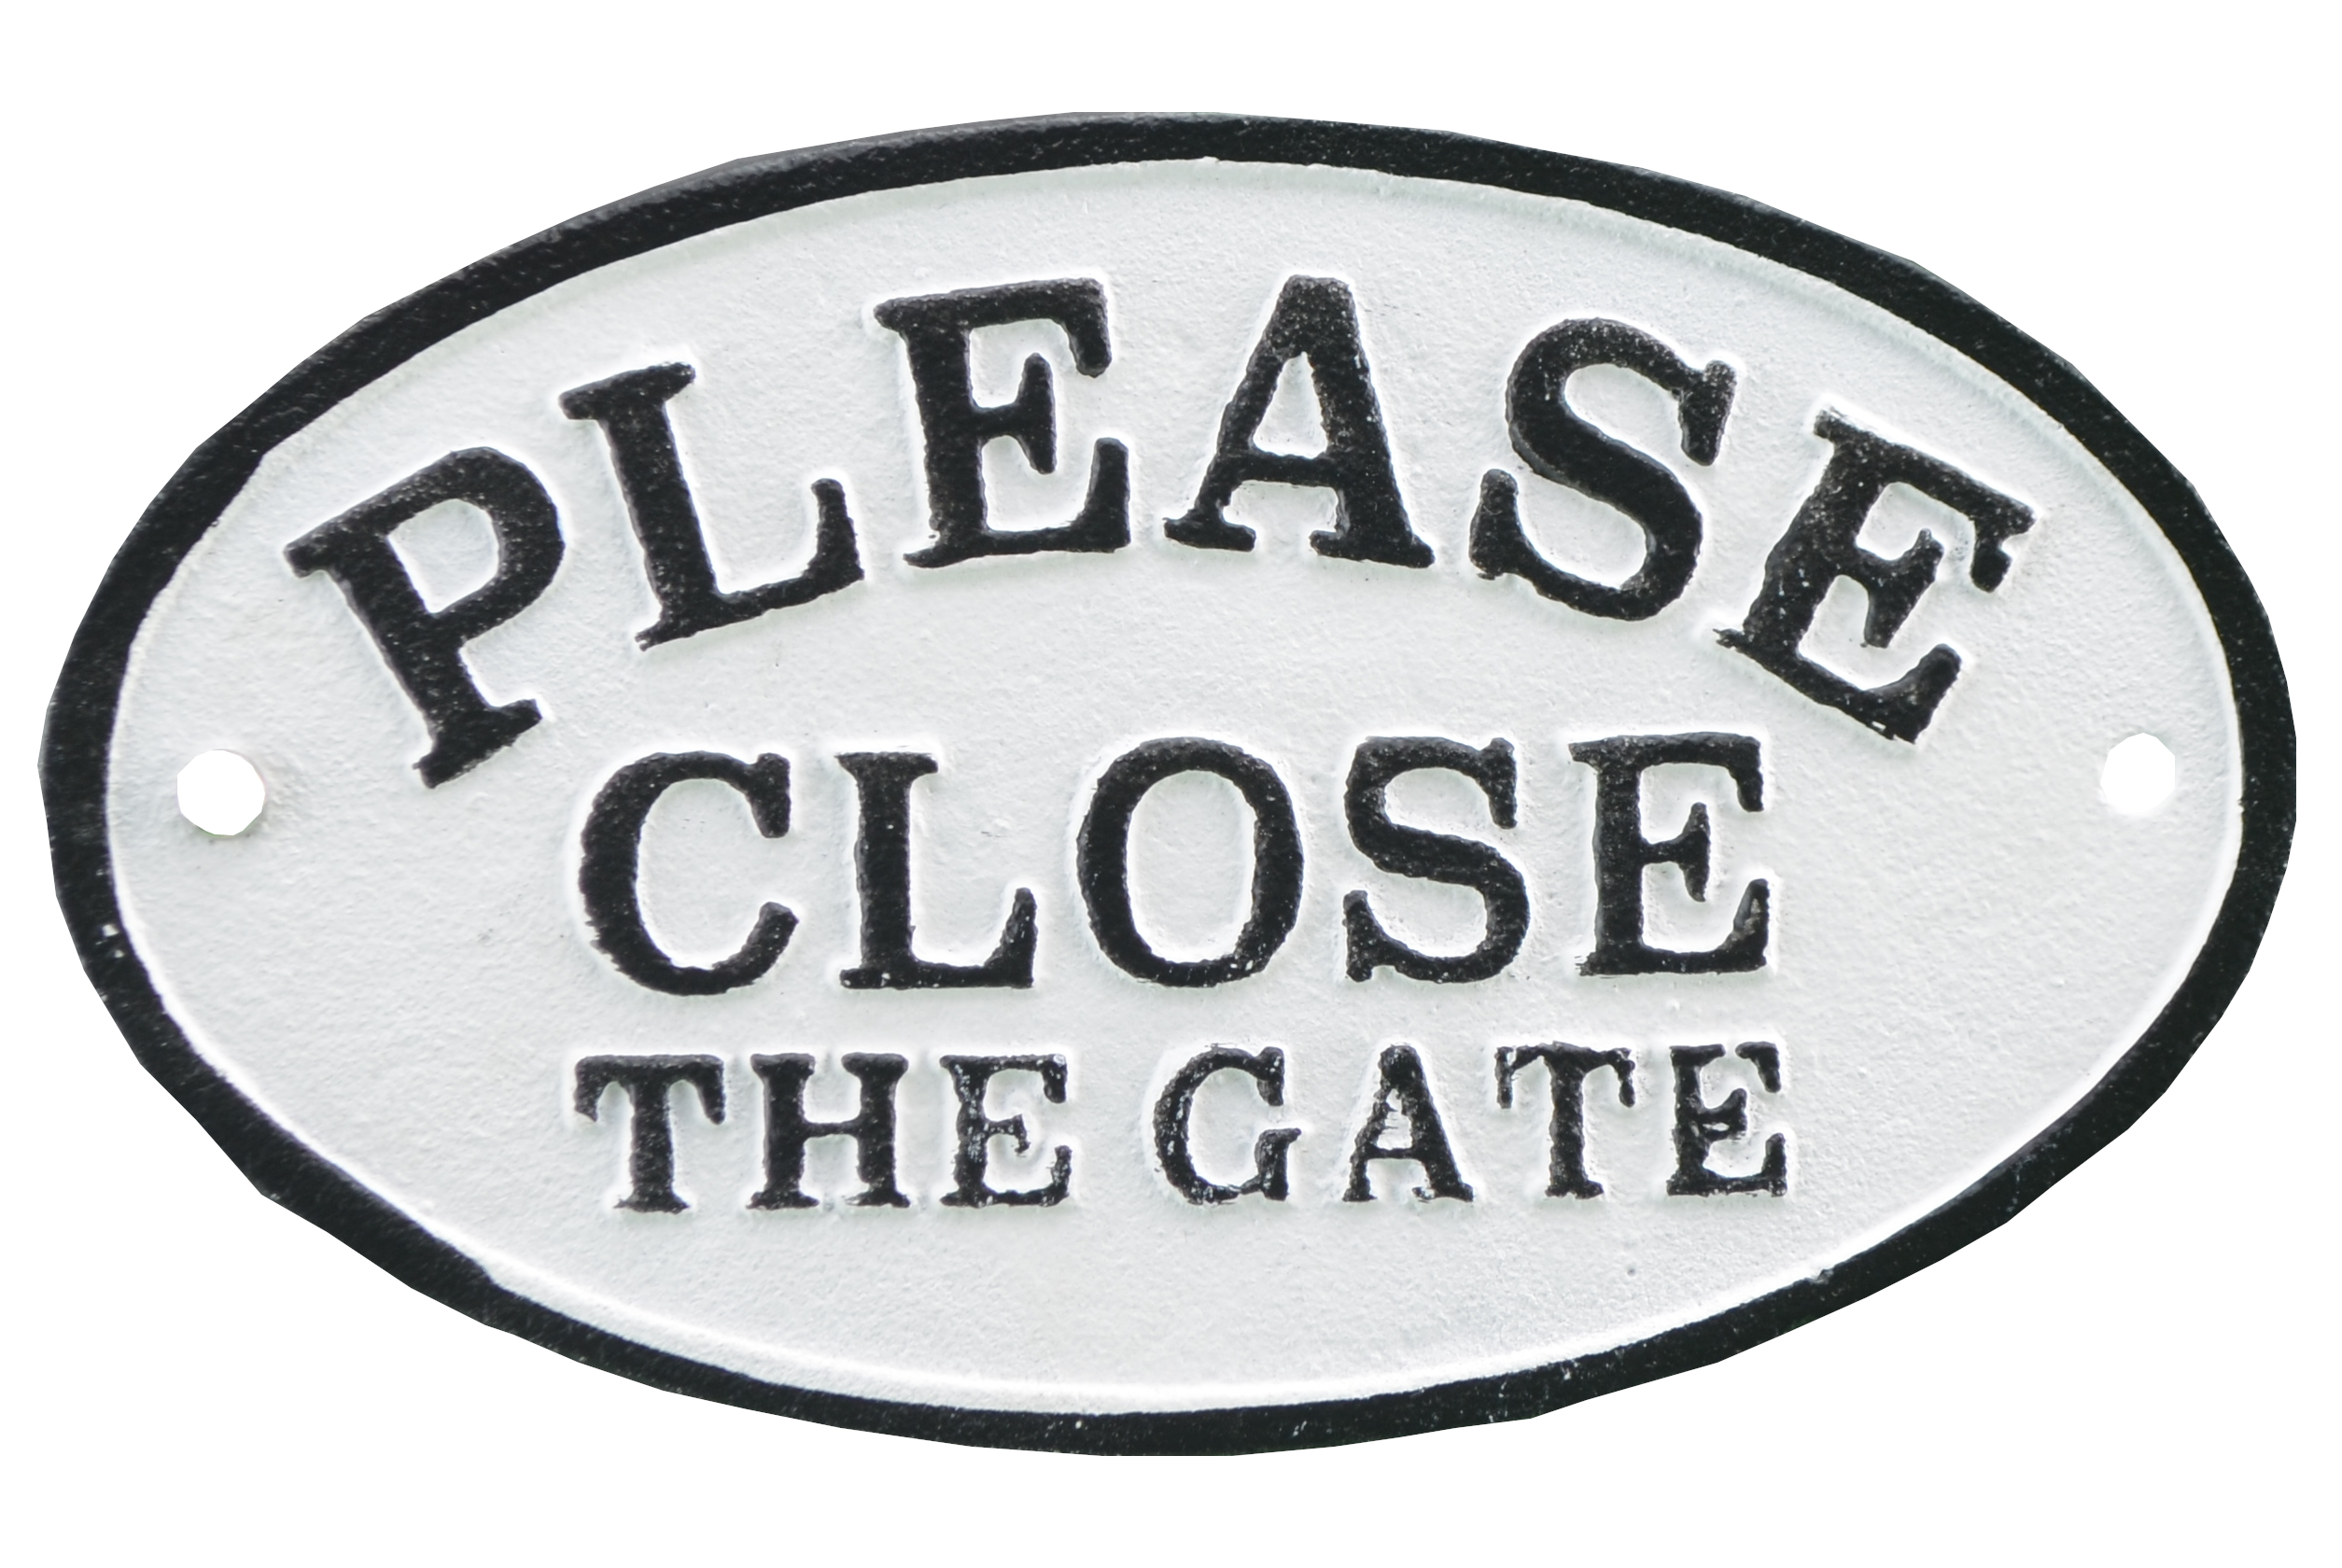 Vintage Look Cast Iron Oval Plaque PLEASE CLOSE THE GATE Sign 